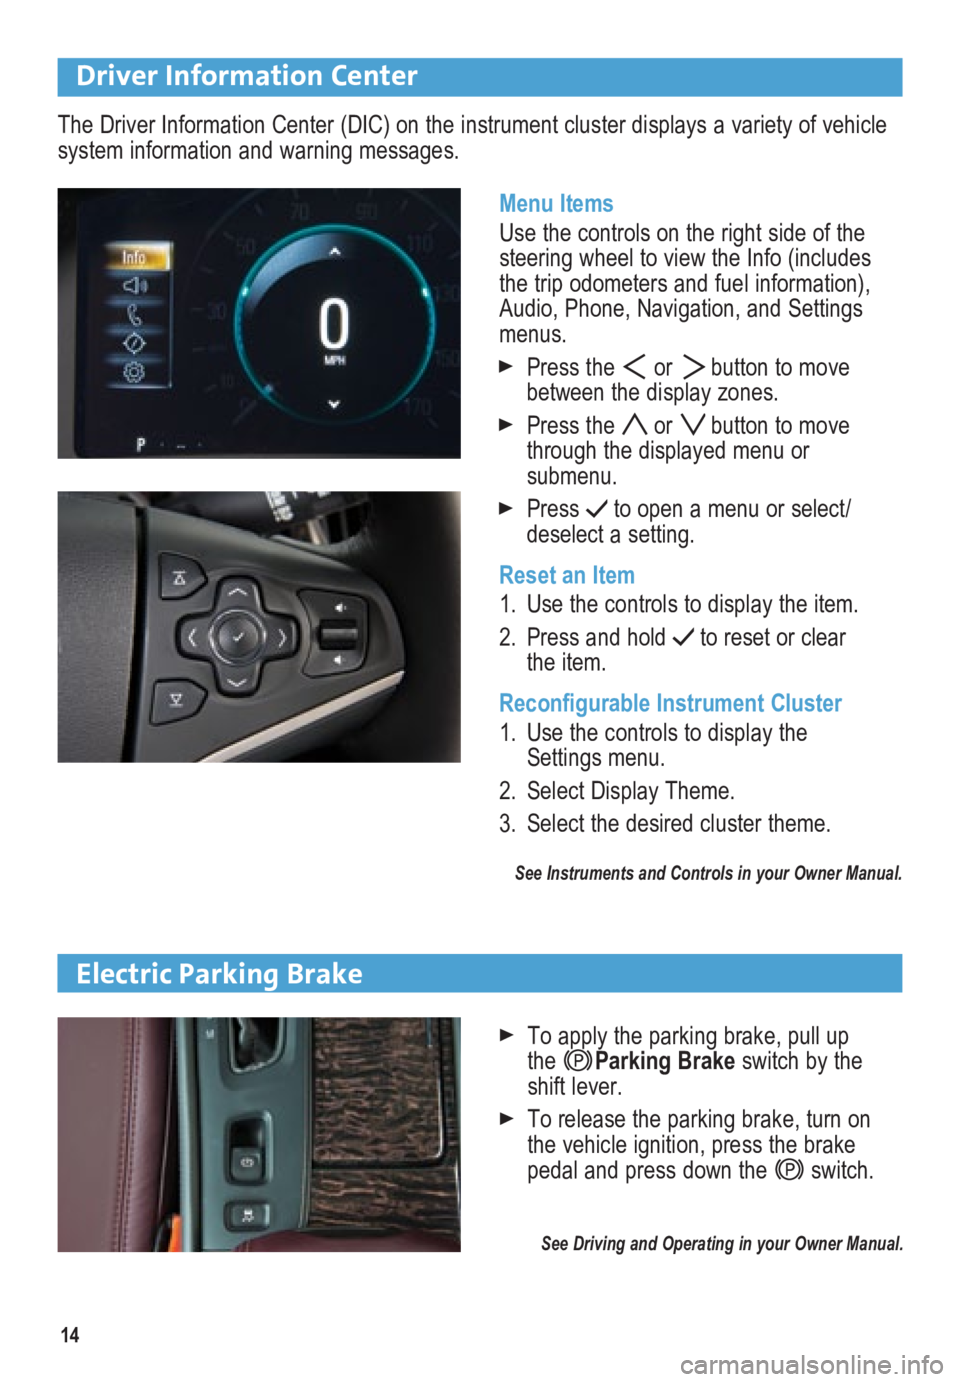 BUICK LACROSSE 2014  Get To Know Guide 14
Driver Information Center
Menu Items
Use the controls on the right side of the 
steering wheel to view the Info (includes 
the trip odometers and fuel information), 
Audio, Phone, Navigation, and S